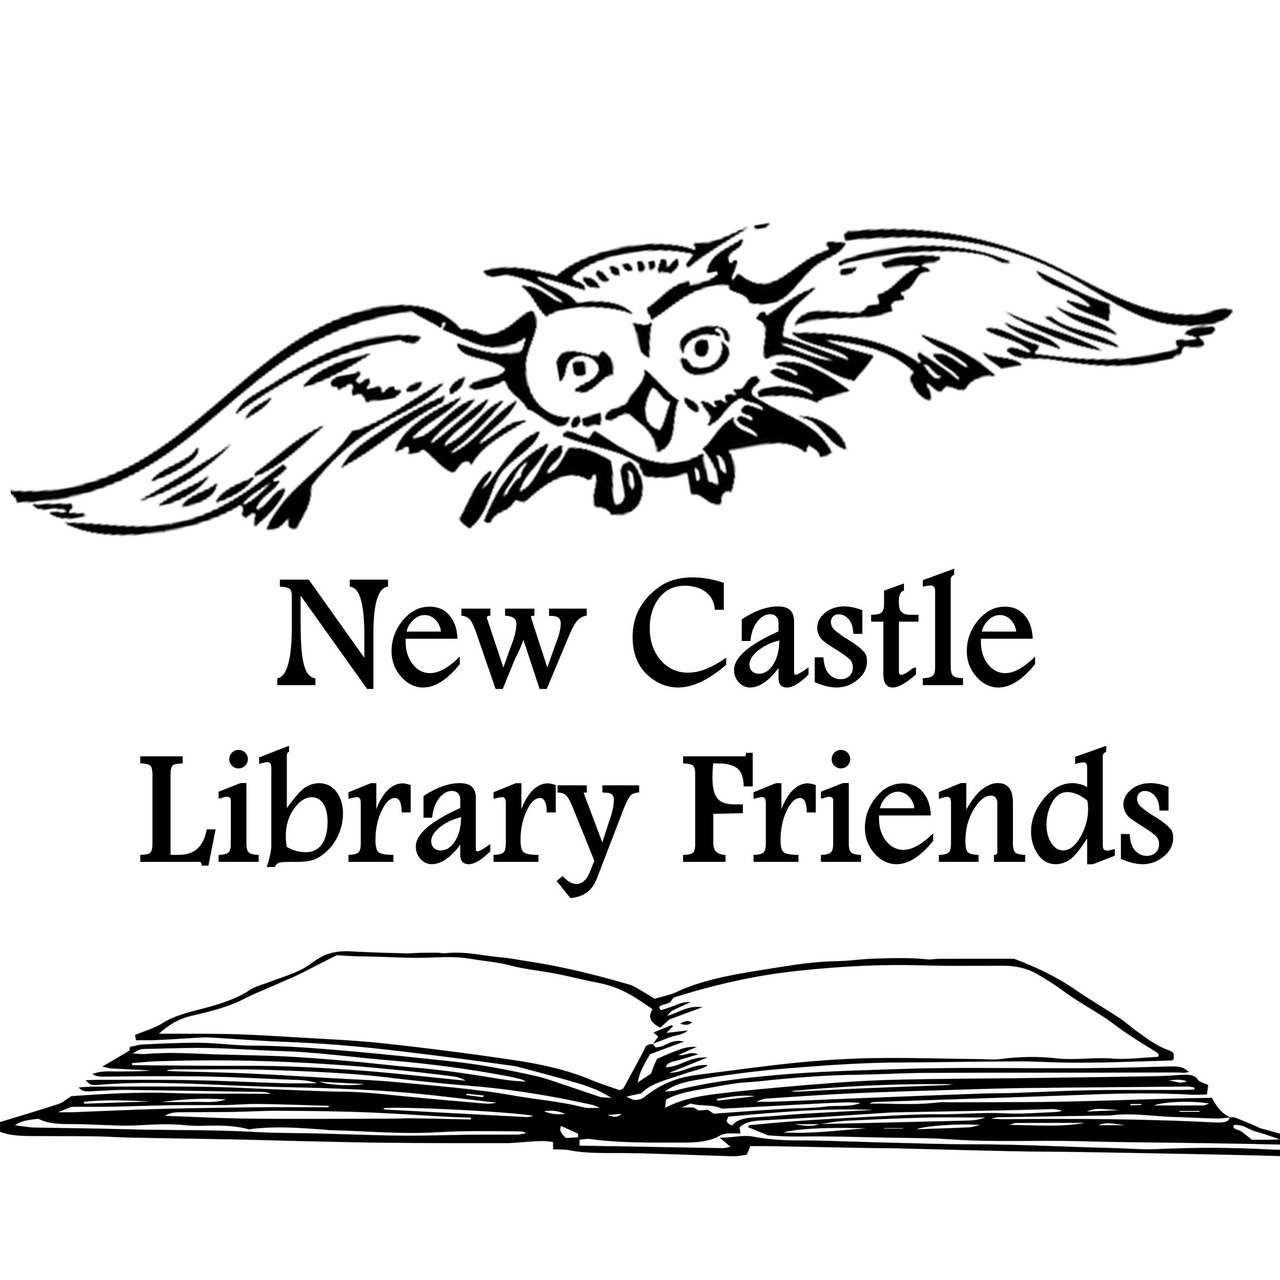 New Castle Library Friends